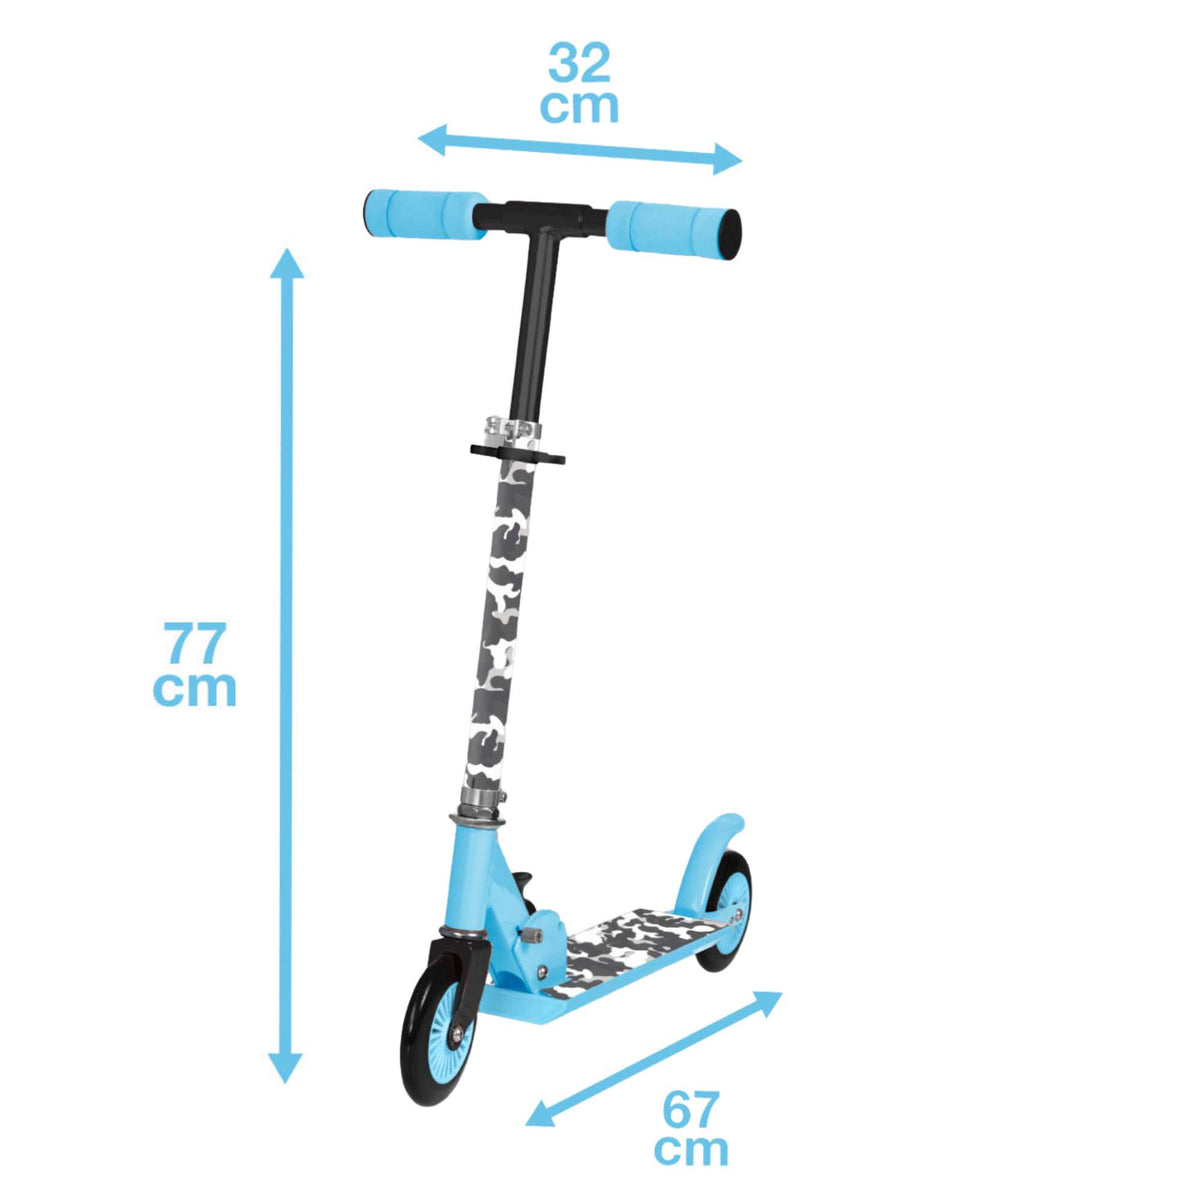 Inline Scooter, Scooter For 5 Year Olds, Push Scooter, Two Wheeled Scooter, Folding Scooter